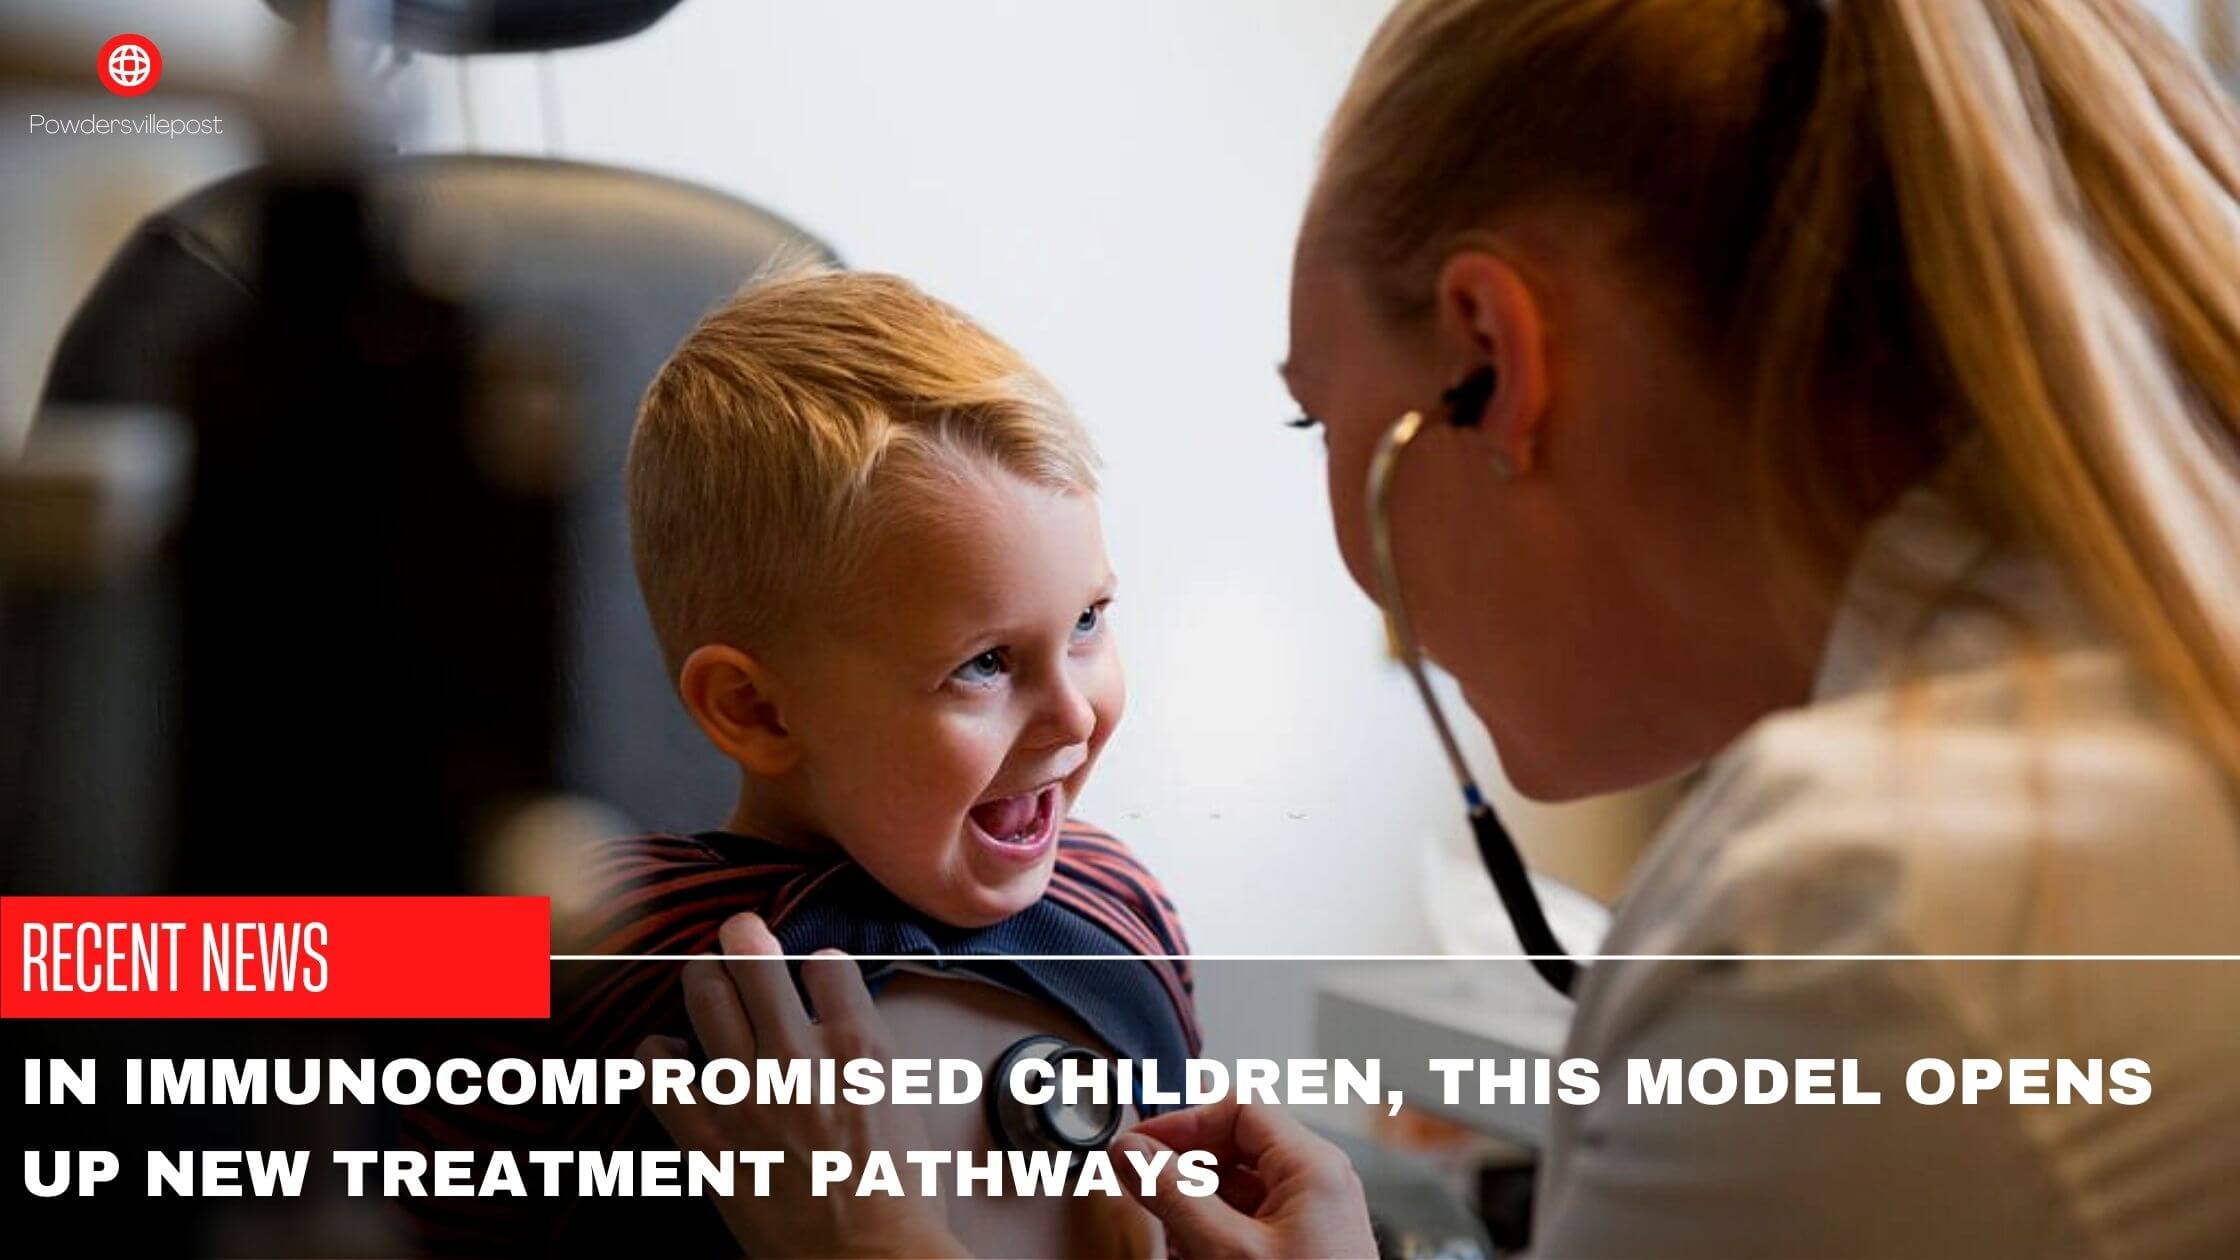 In Immunocompromised Children, This Model Opens Up New Treatment Pathways